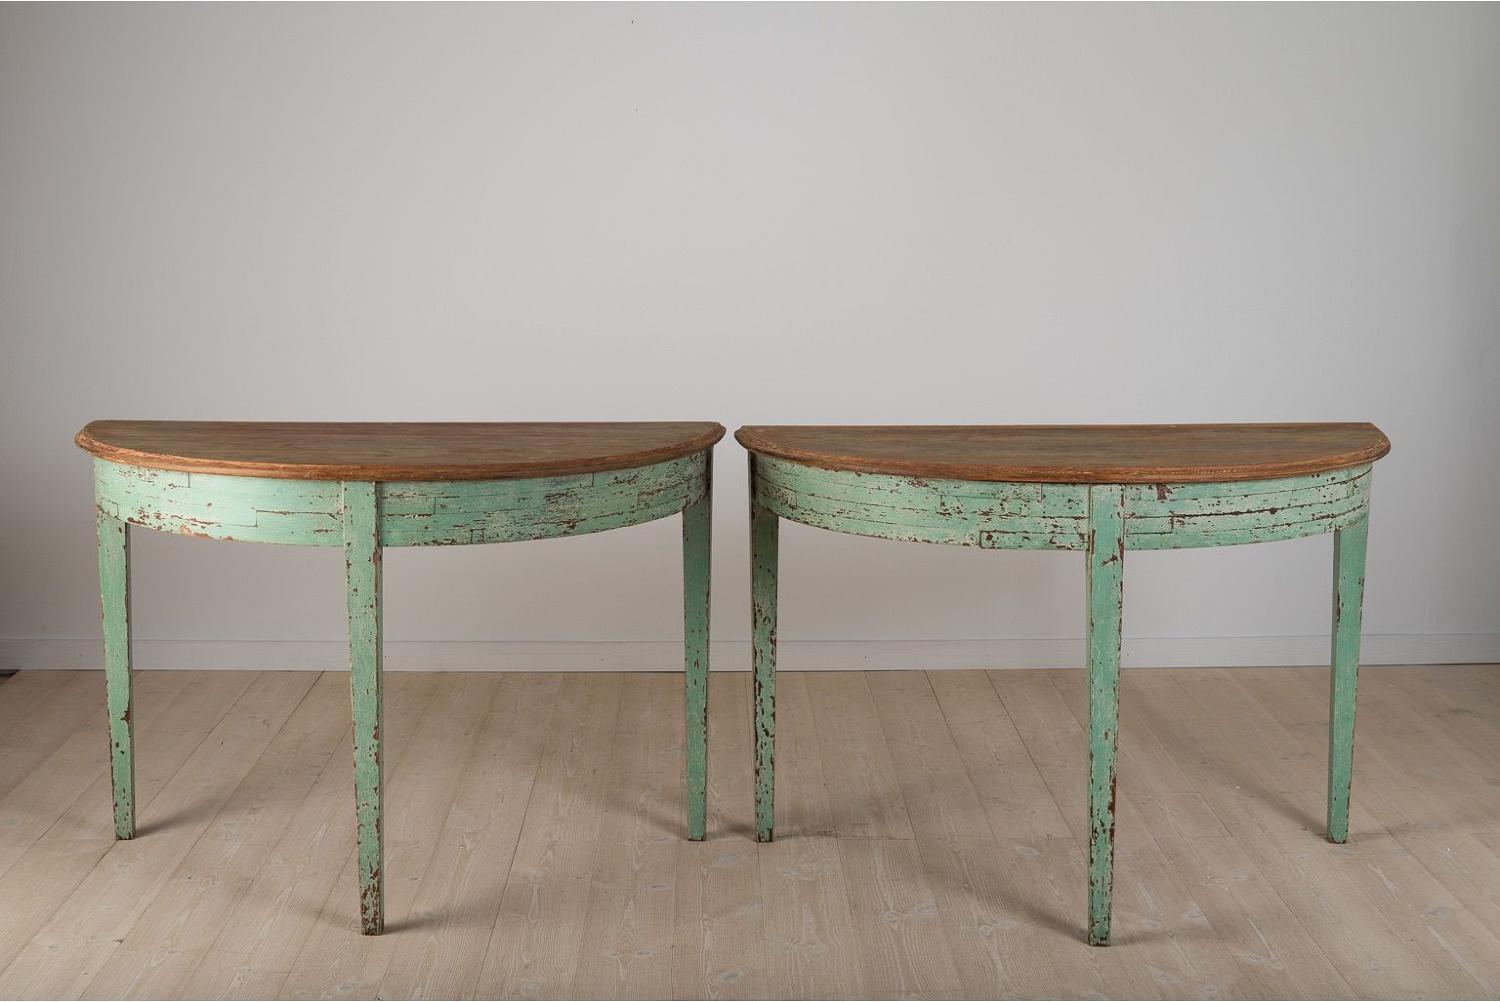 Pair of Swedish Demi-Lune Console Tables, 1850